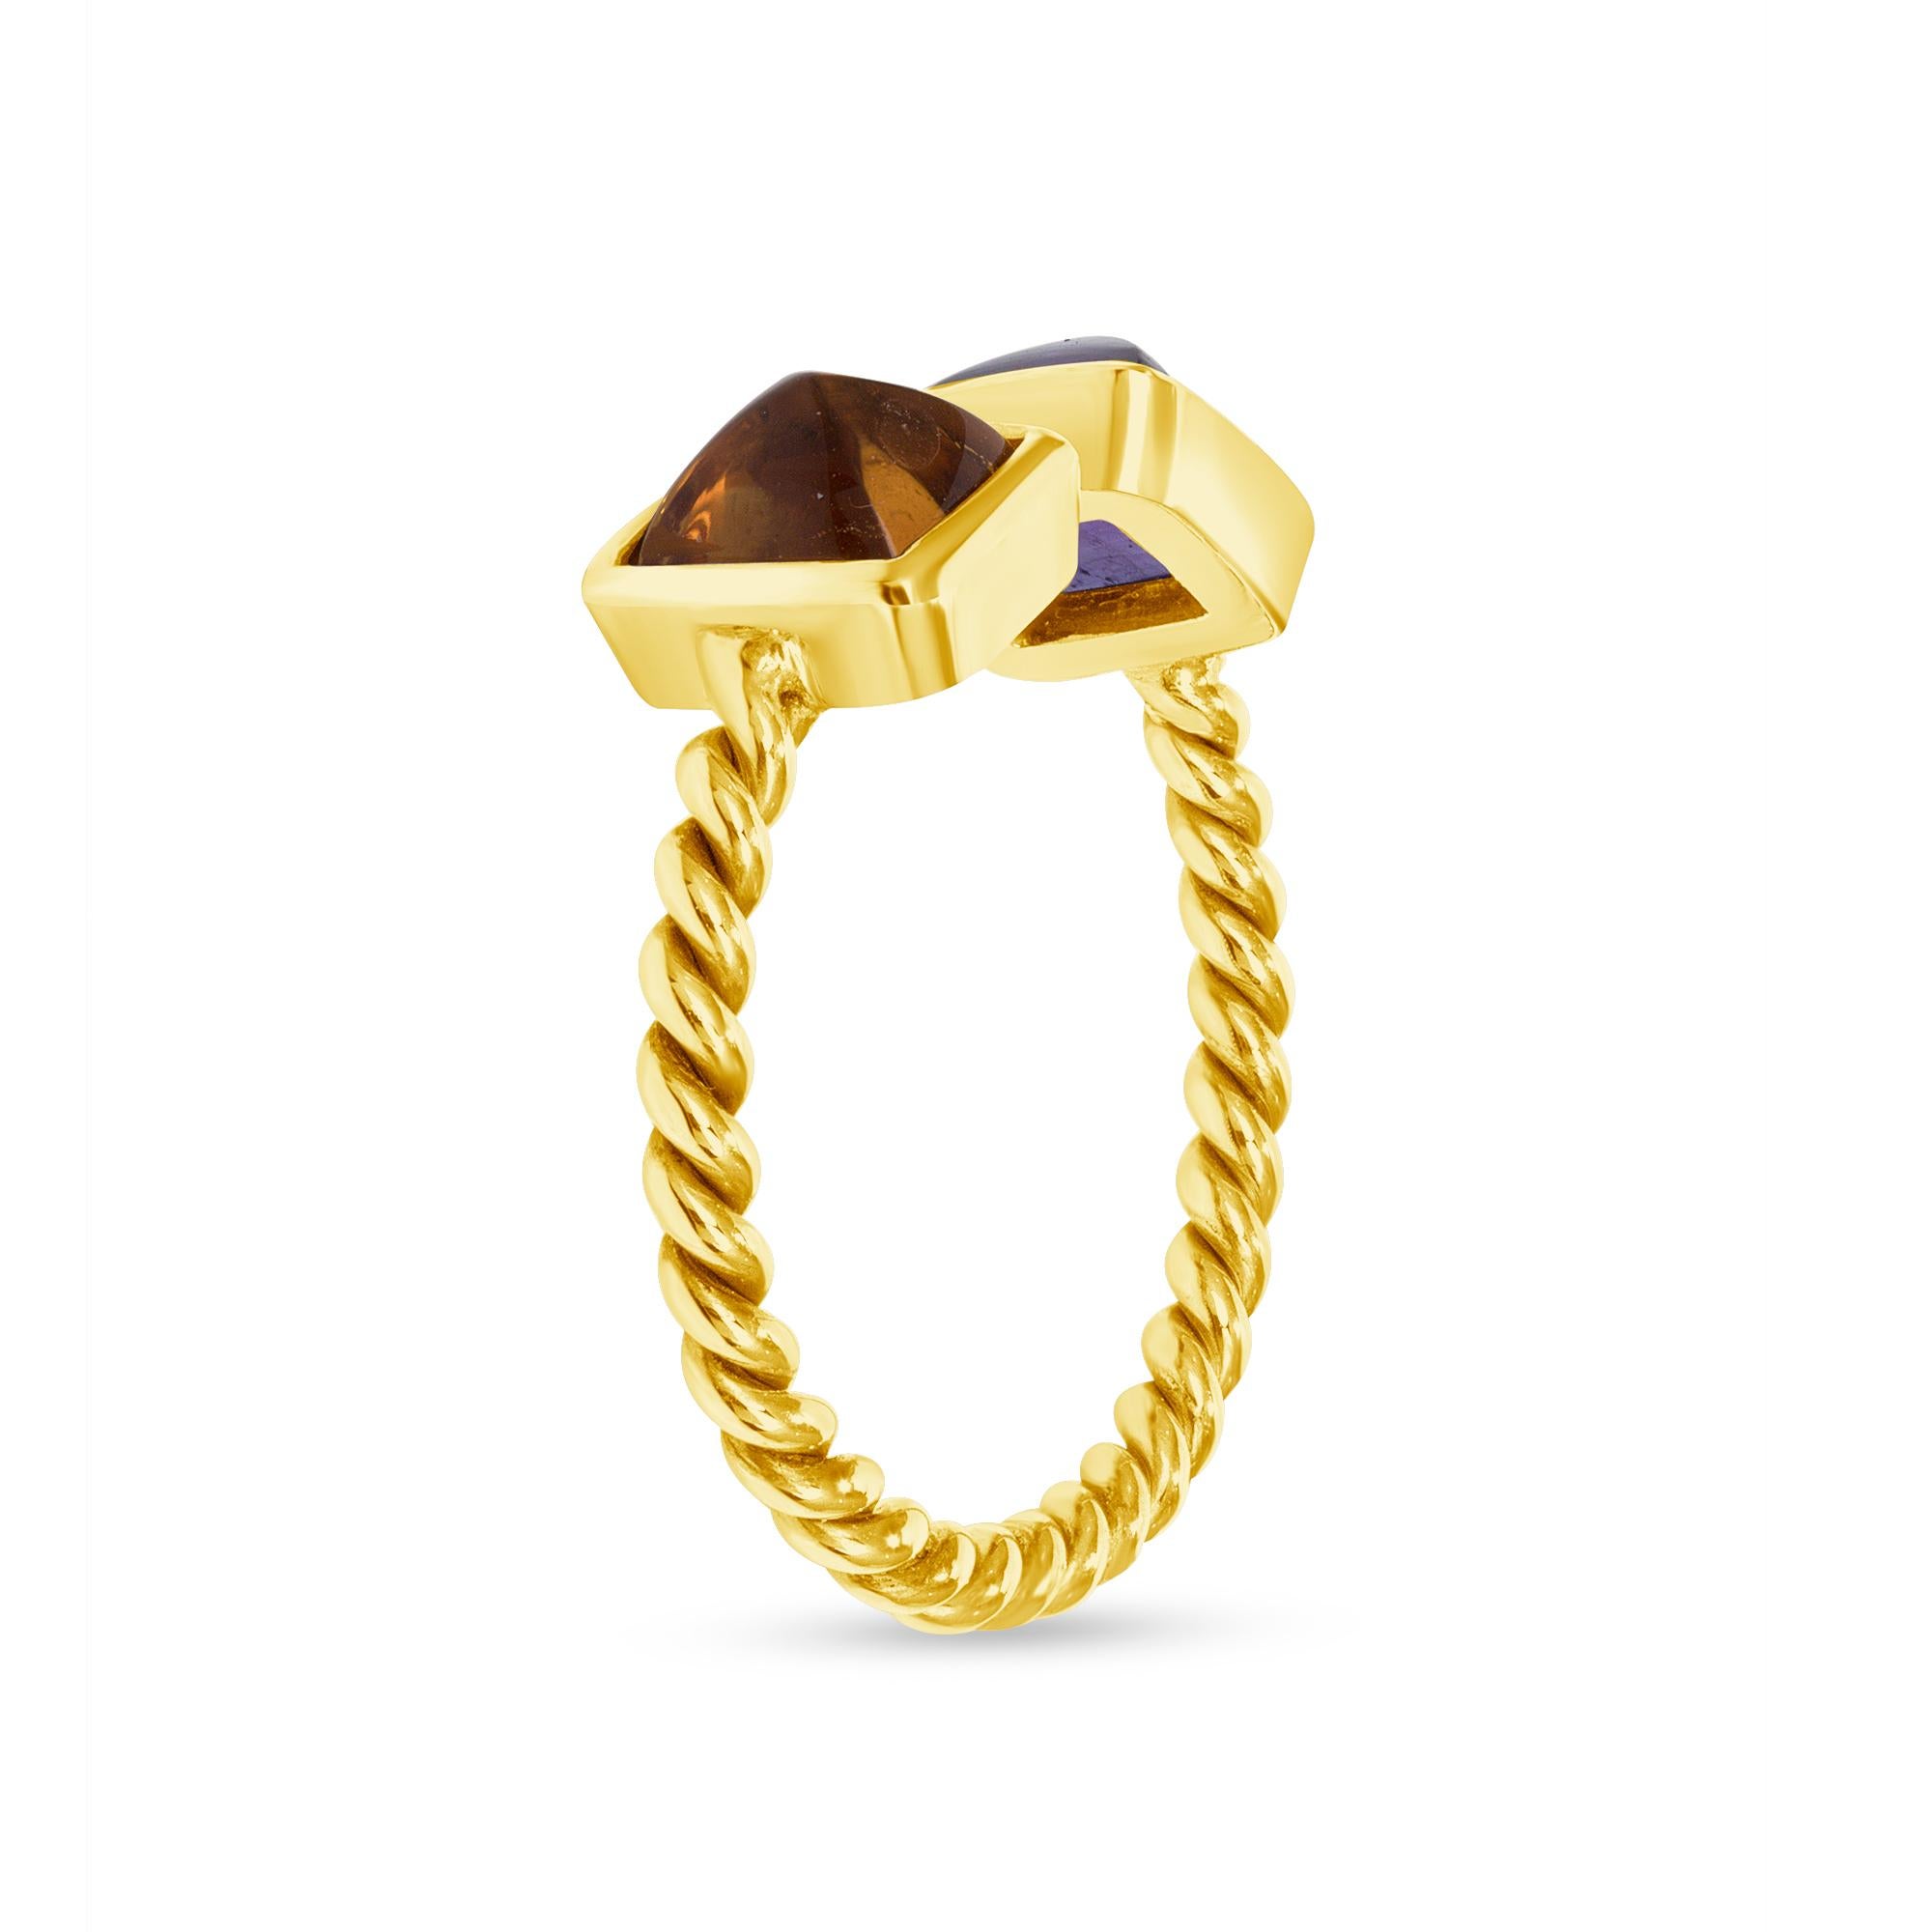 Designed by award-winning artist Brenda Smith, this size 5-7 ​​twist textured open shank ring features meticulously cut sugarloaf citrine and amethyst cabochon set in 14-karat yellow gold. This ring represents the signature style of Brenda Smith by